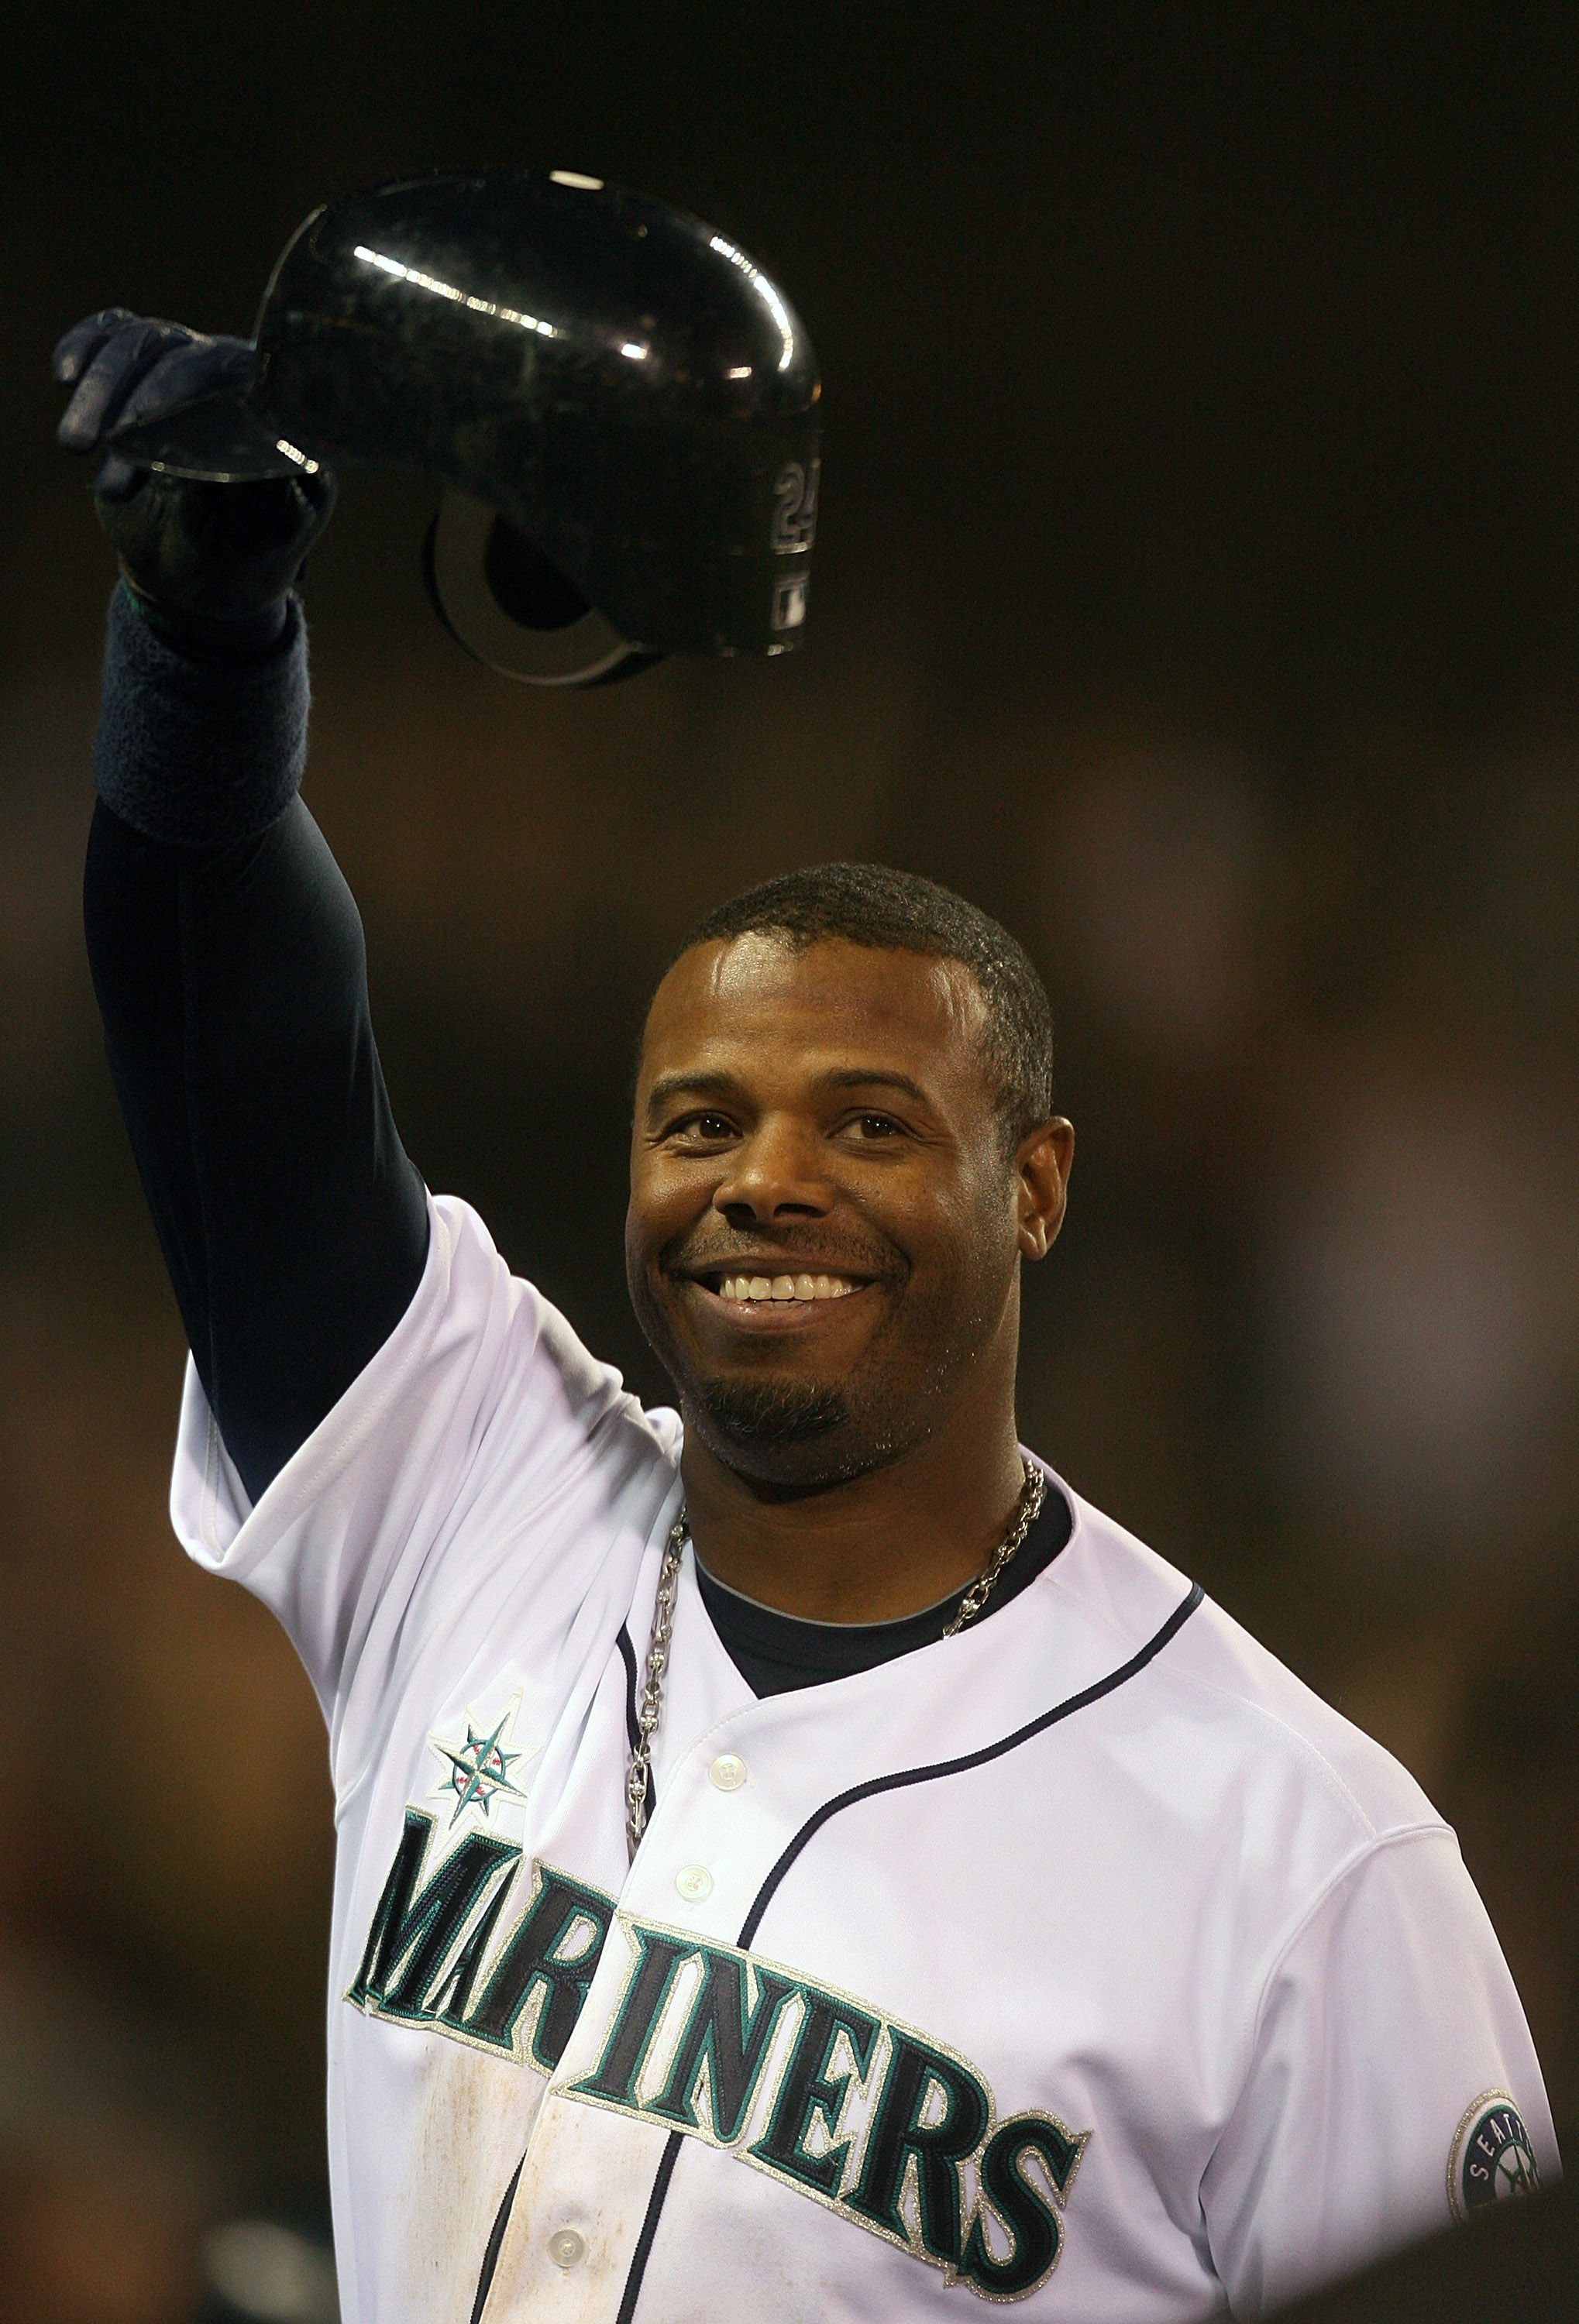 Hall focus next year turns to Griffey, Hoffman and Wagner